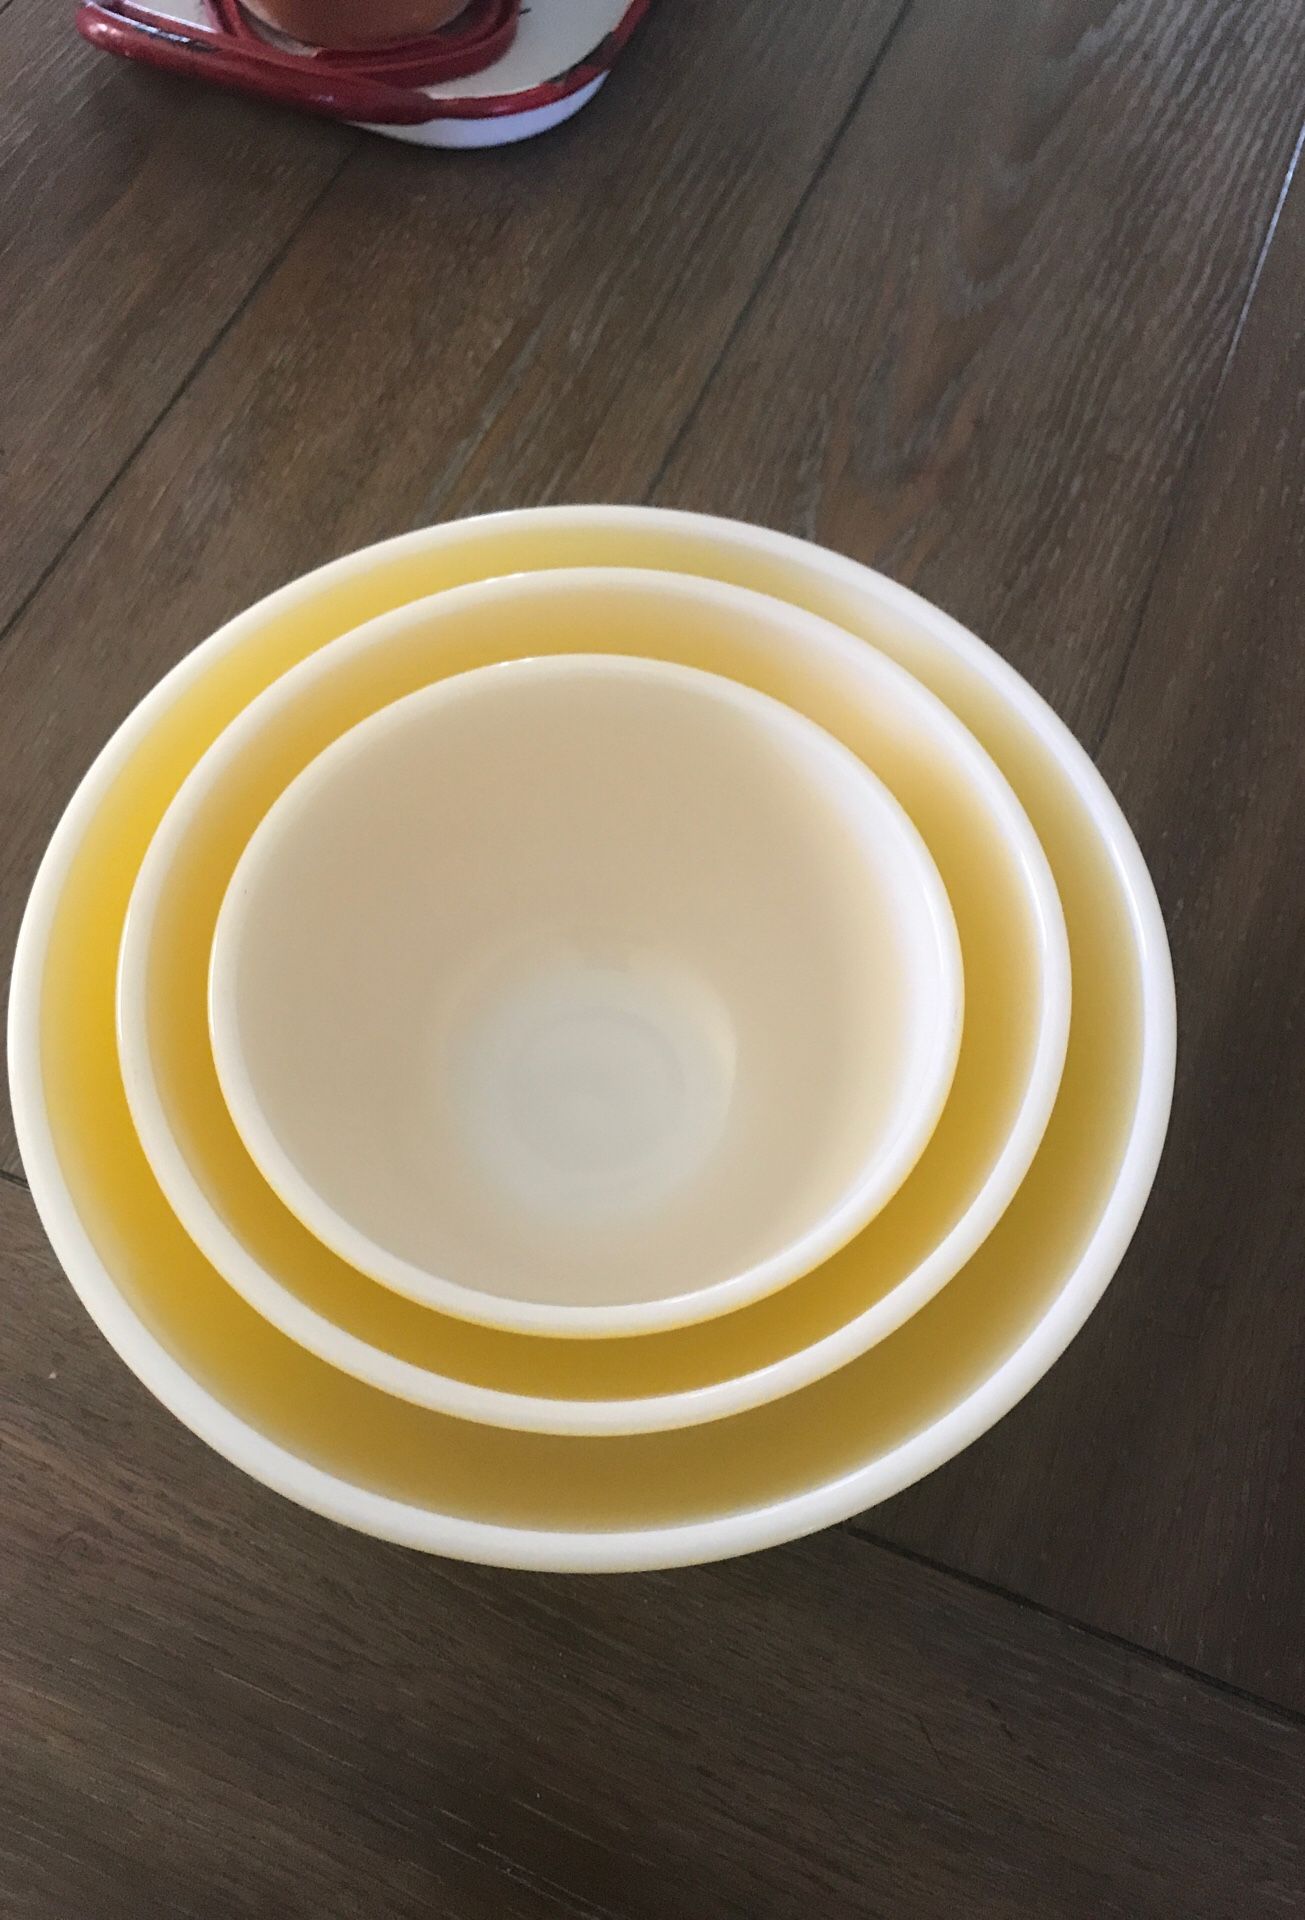 Beautiful vintage Pyrex nesting bowls yellow. No chips or fading